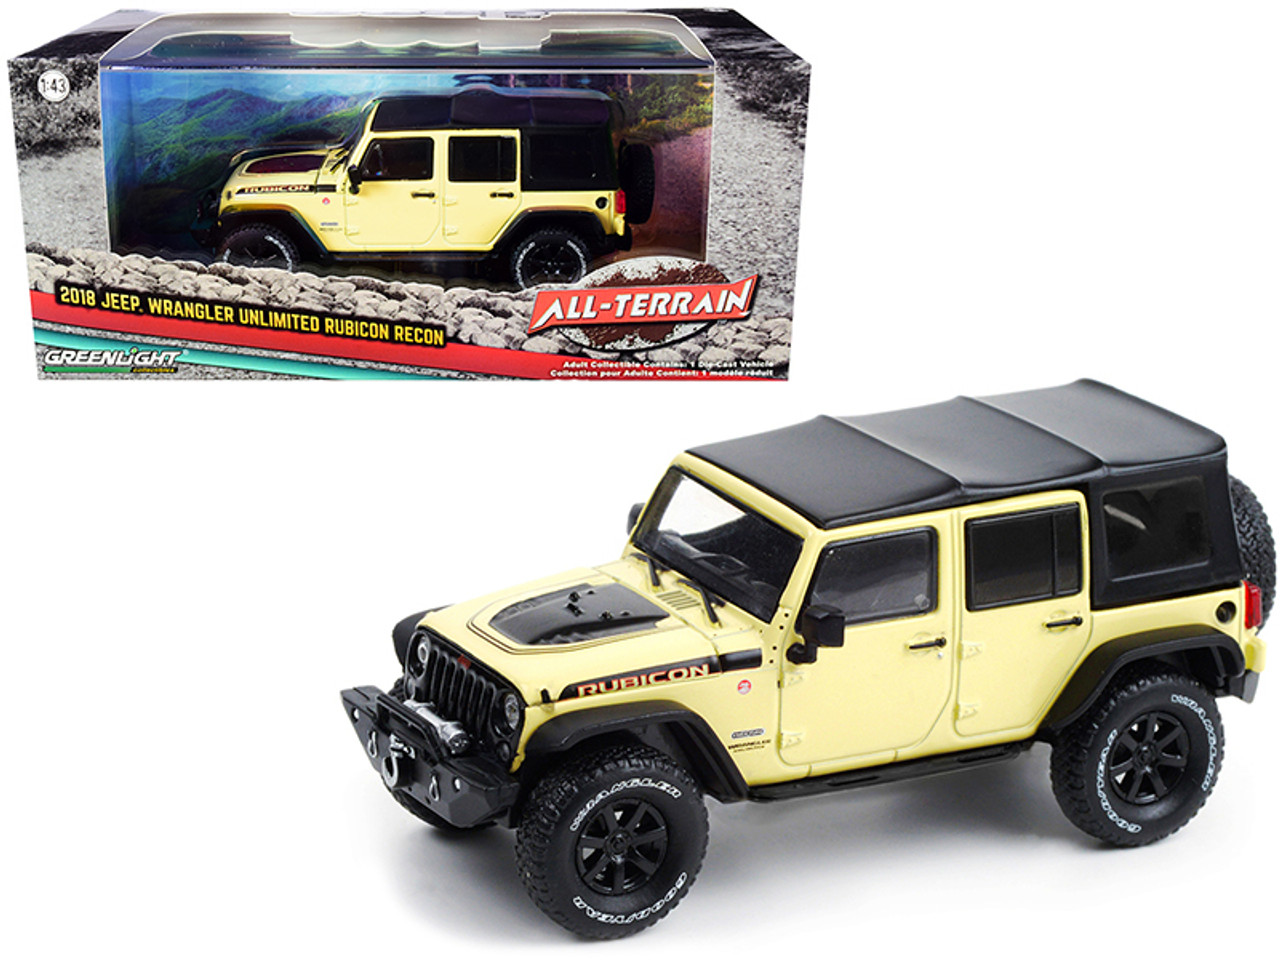 2018 Jeep Wrangler Unlimited Rubicon Recon with Off-Road Parts Gobi Yellow with Black Top "All-Terrain" Series 1/43 Diecast Model Car by Greenlight